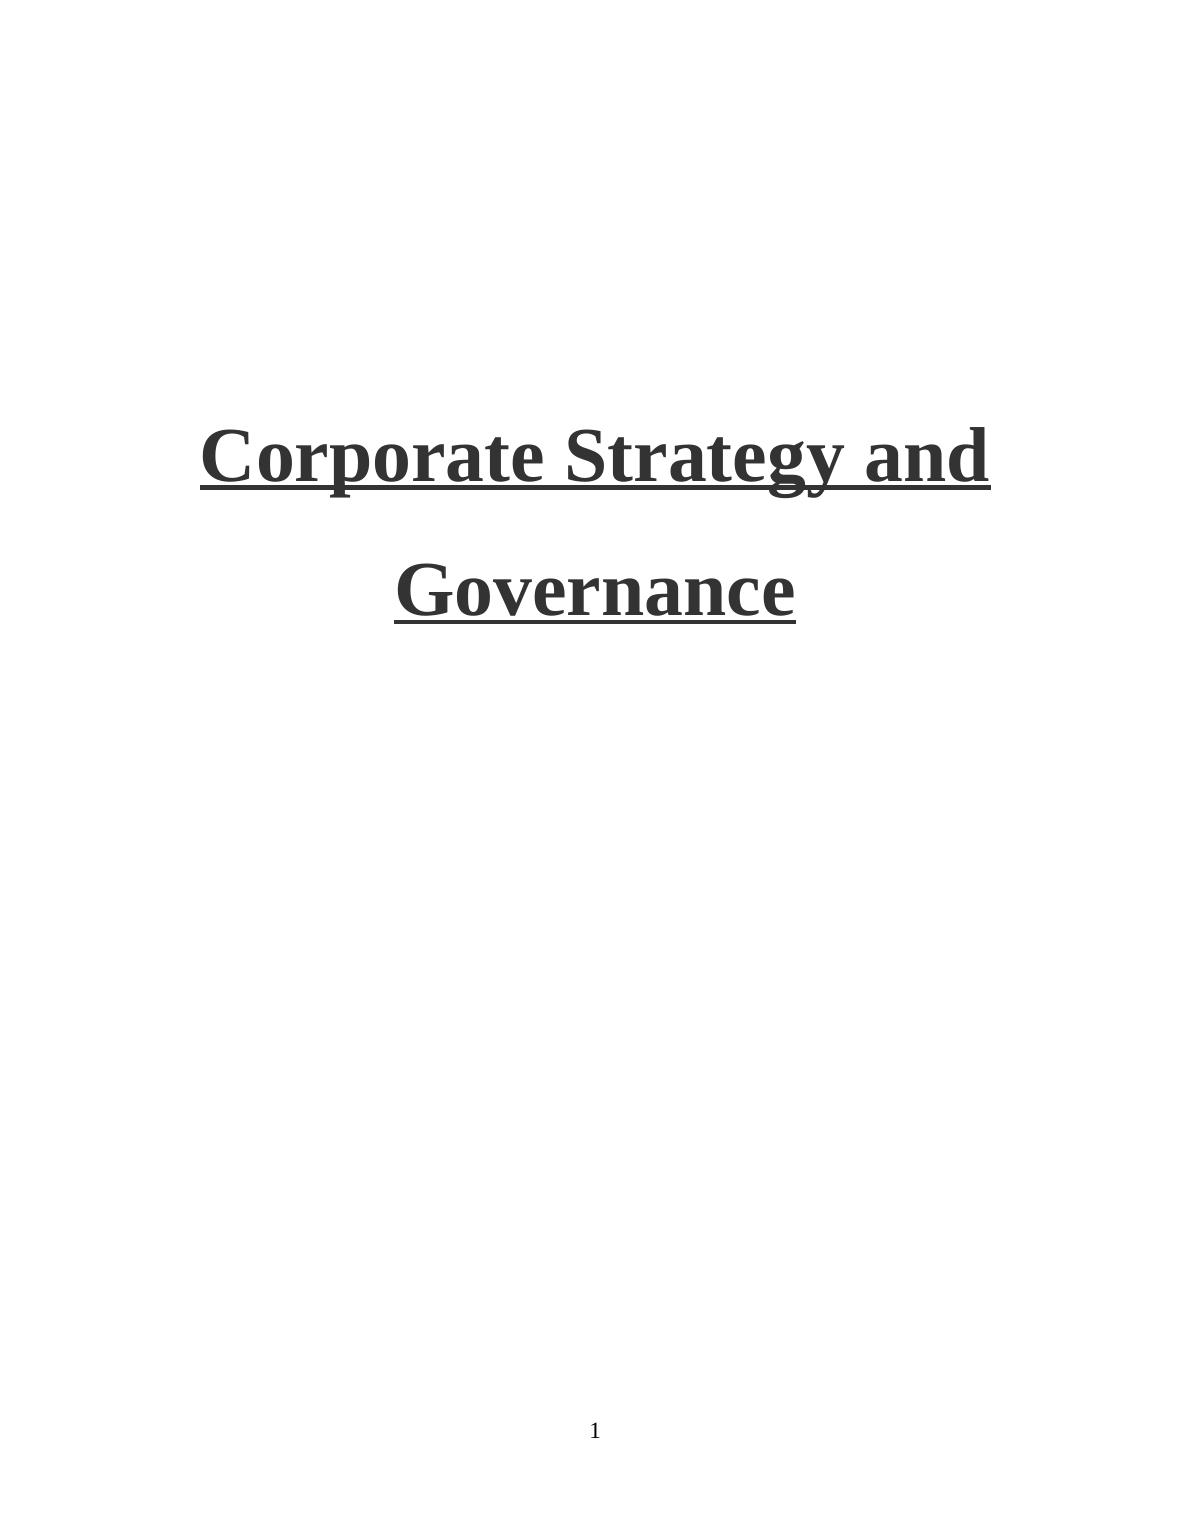 Impact of Corporate Strategy and Governance on Business Finance: A Case Study on Tesco_1